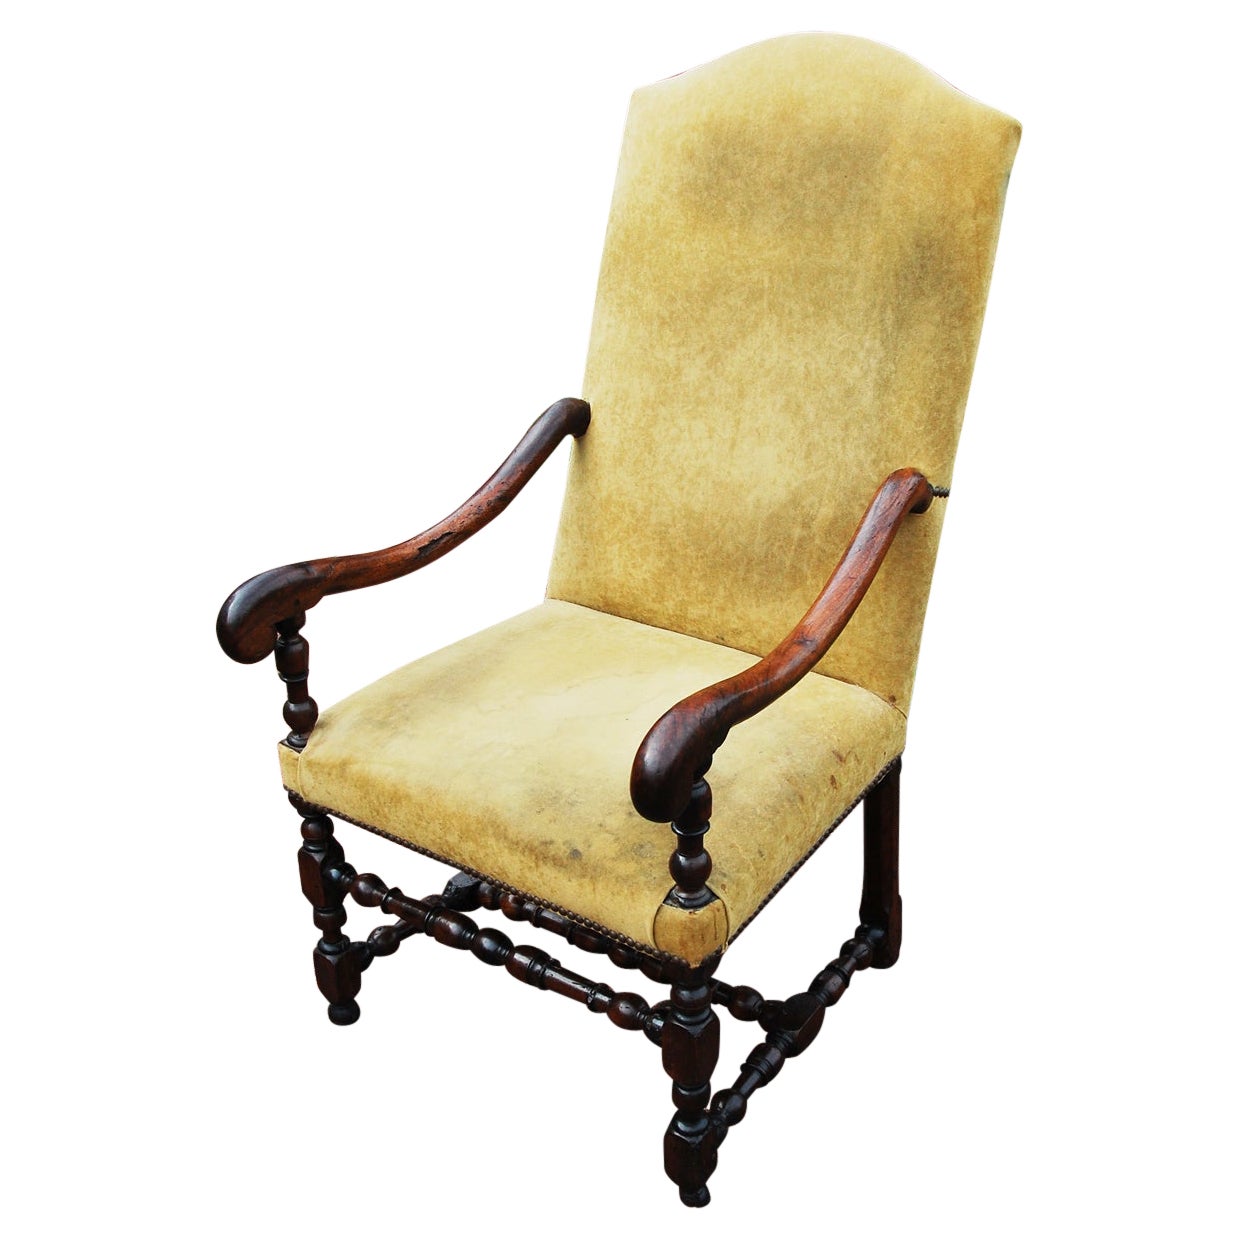 English William and Mary Period Walnut Carved and Turned Lounging Chair